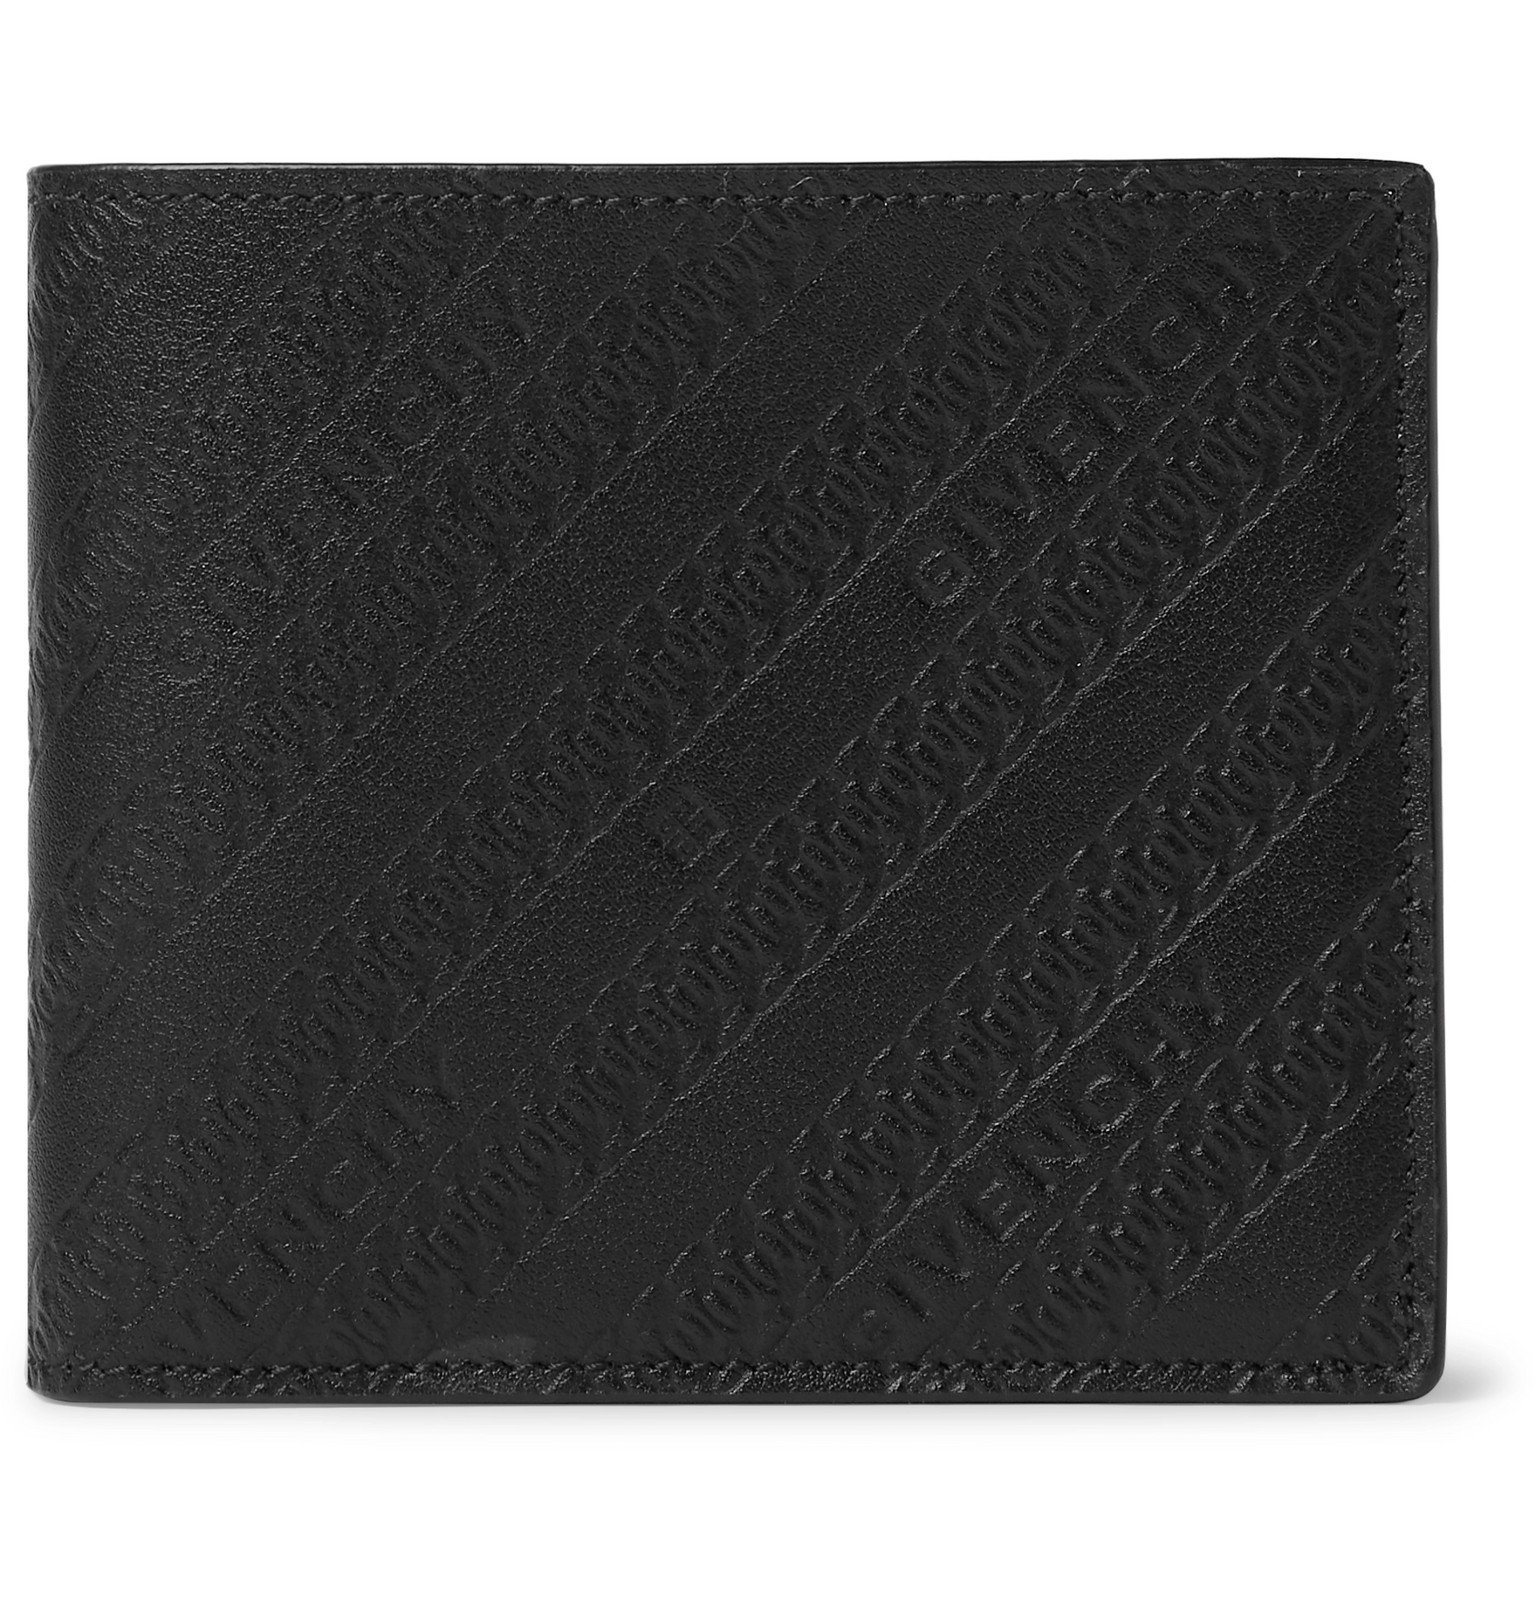 Givenchy - Logo-Embossed Leather Billfold Wallet - Black Givenchy